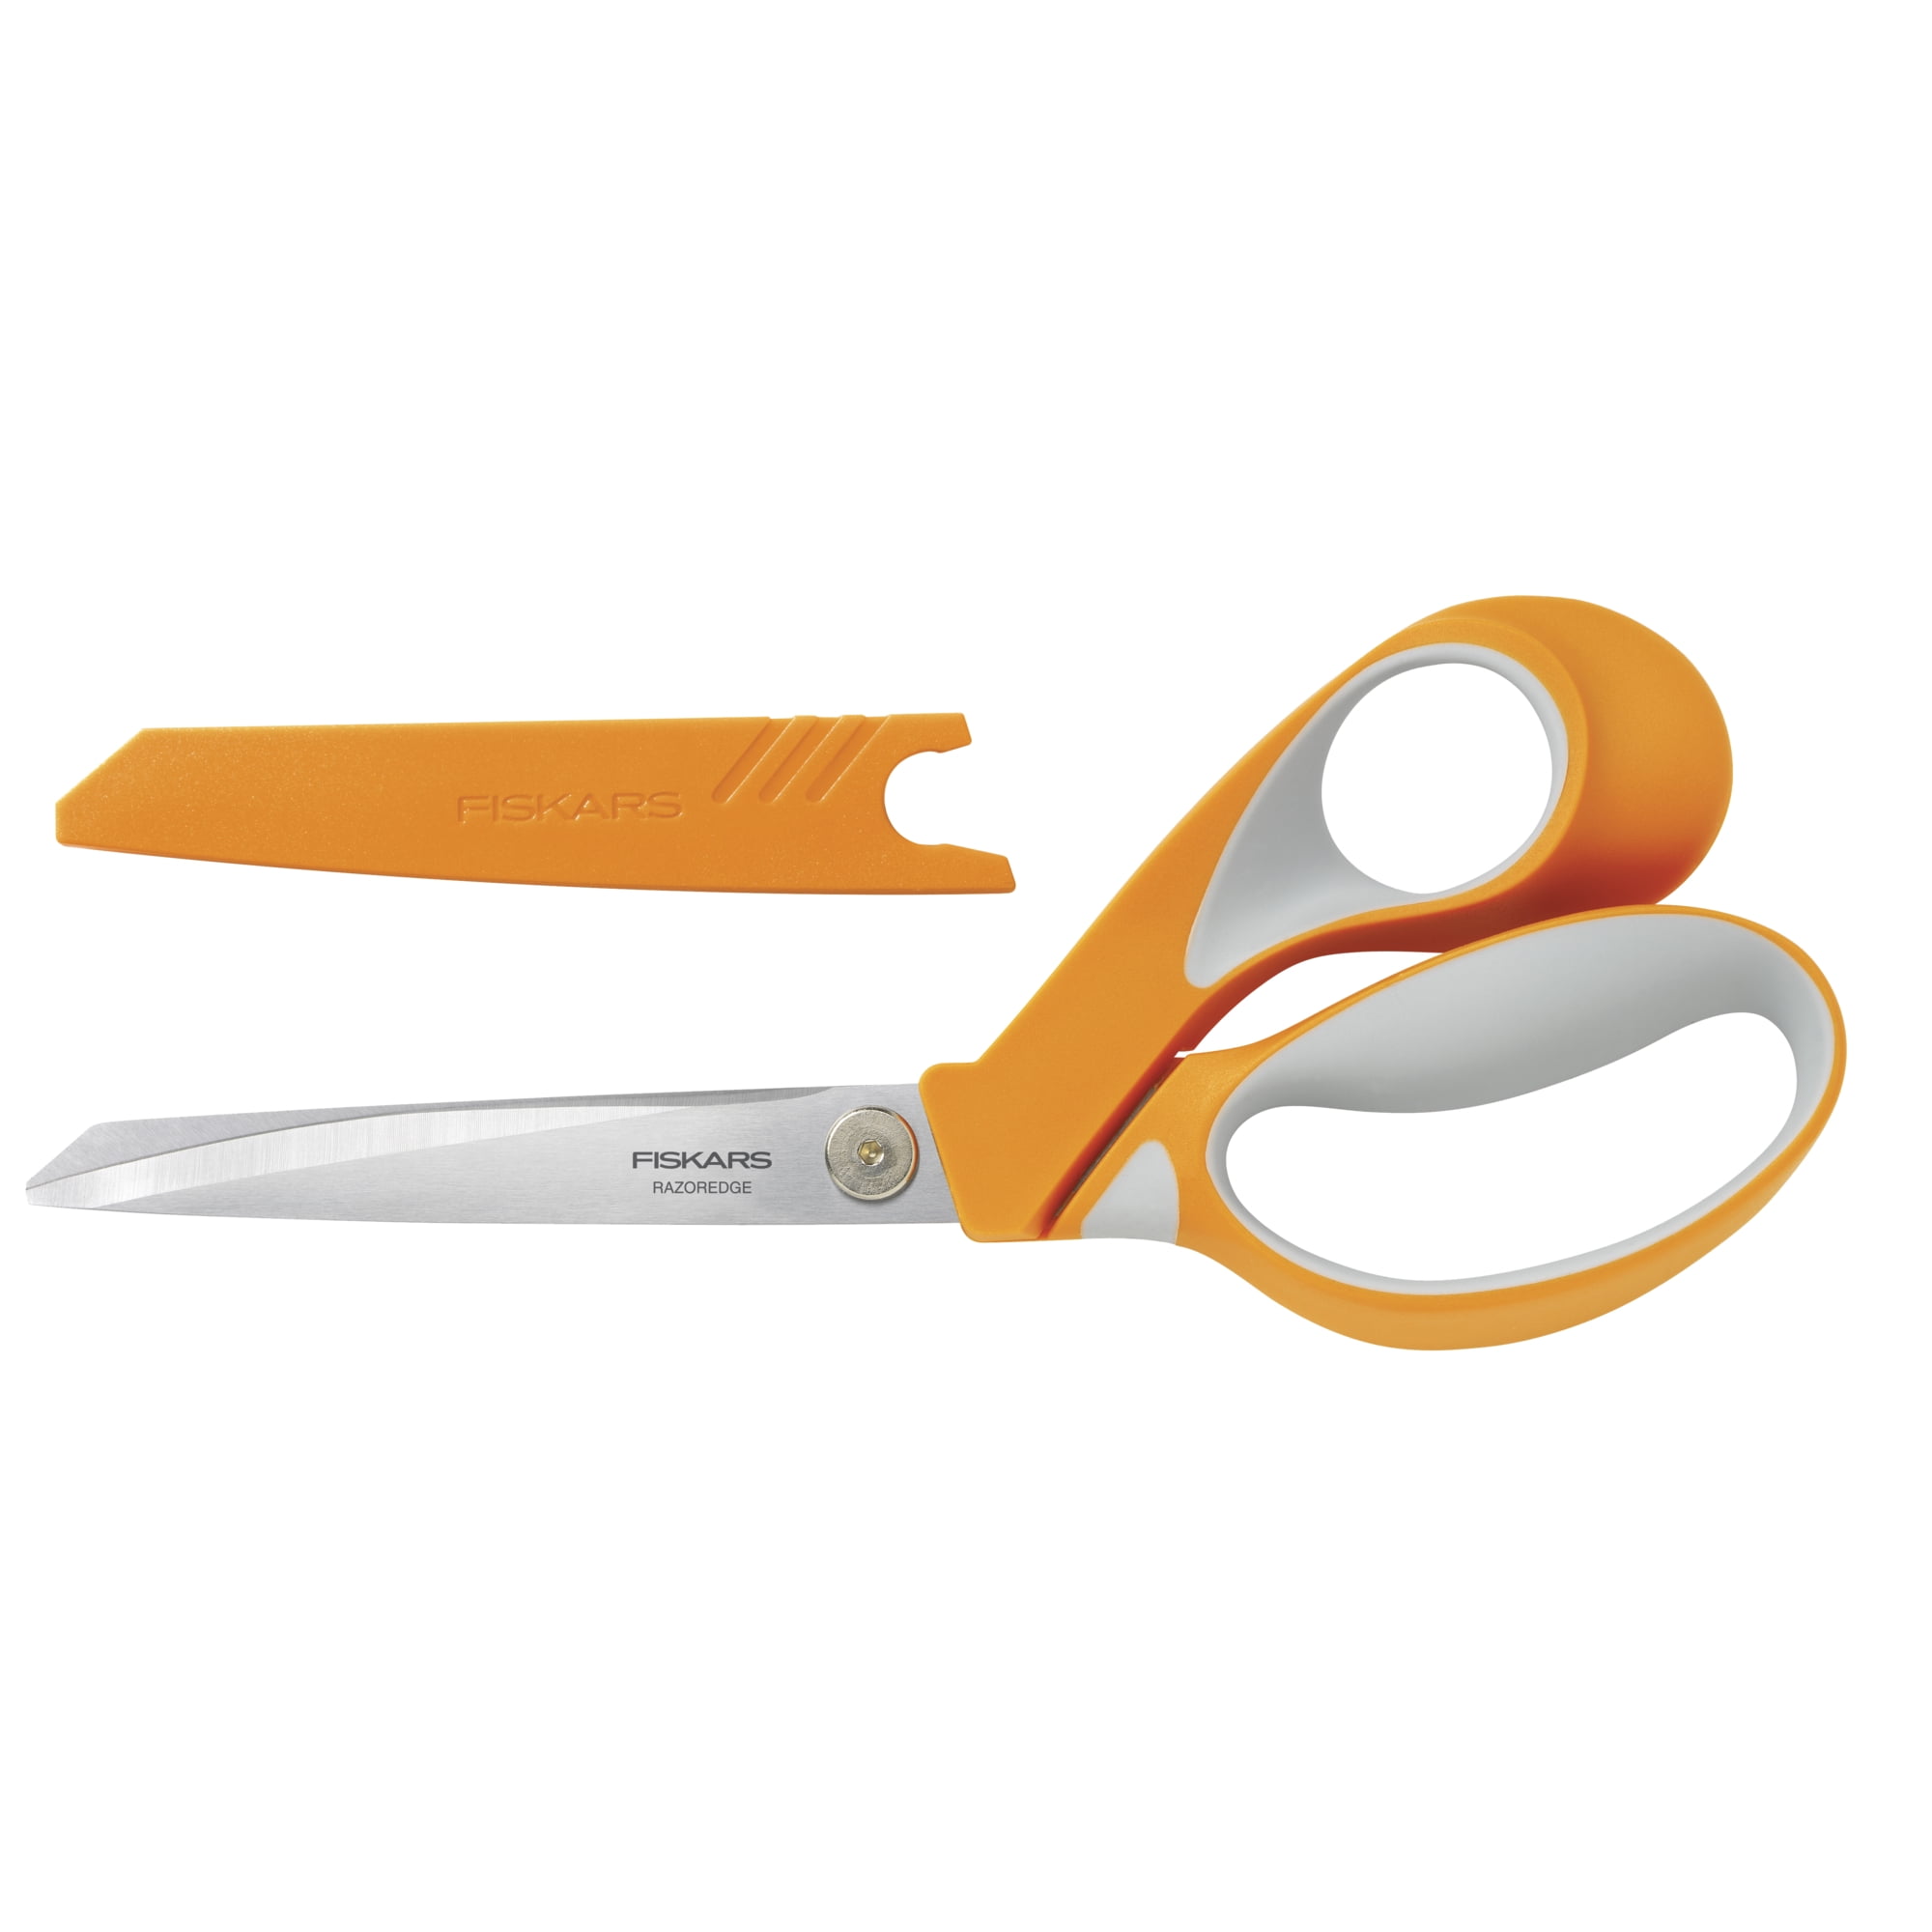 Havel's Double Curved Embroidery Scissors Large Finger Loop 3.5in